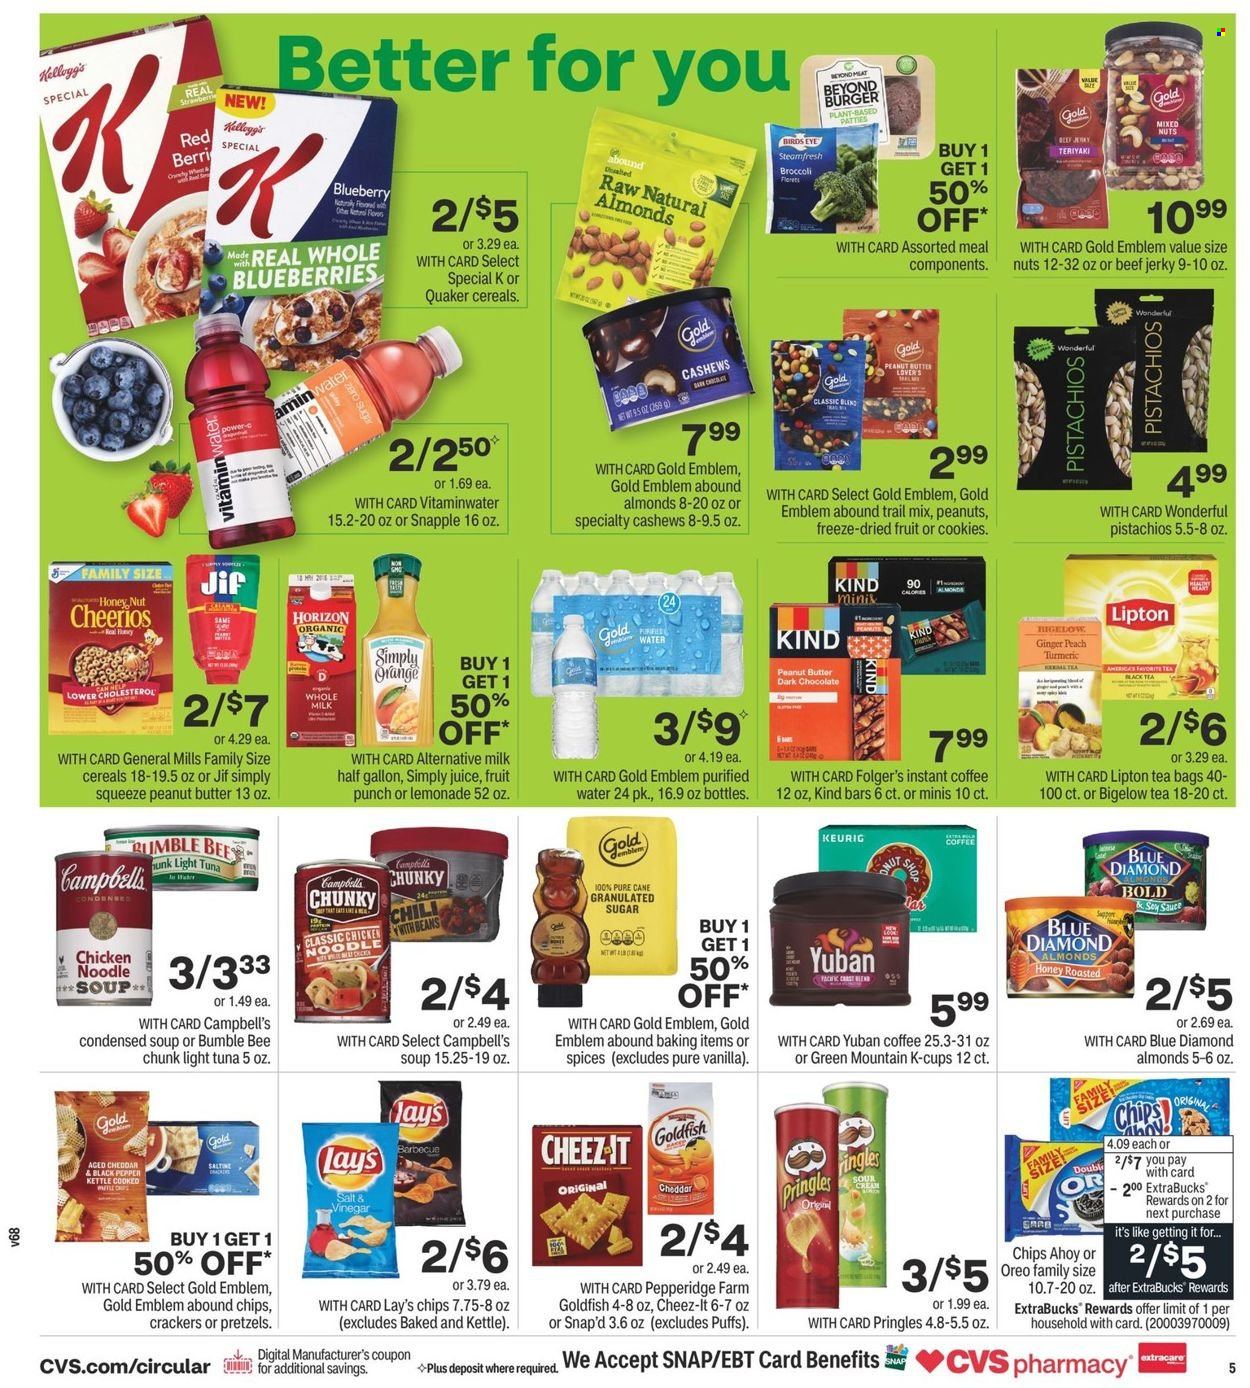 thumbnail - CVS Pharmacy Flyer - 09/19/2021 - 09/25/2021 - Sales products - Campbell's, condensed soup, soup, Bumble Bee, sauce, Quaker, noodles, instant soup, beef jerky, jerky, milk, Oreo, cookies, pretzels, chocolate, crackers, Kellogg's, dark chocolate, Pringles, chips, Lay’s, Goldfish, Cheez-It, saltines, light tuna, puffs, Cheerios, almonds, cashews, peanuts, dried fruit, pistachios, mixed nuts, Blue Diamond, trail mix, lemonade, juice, Lipton, Jif, Snapple, fruit punch, purified water, tea bags, instant coffee, coffee capsules, K-Cups, Keurig, Green Mountain, Select Gold. Page 6.